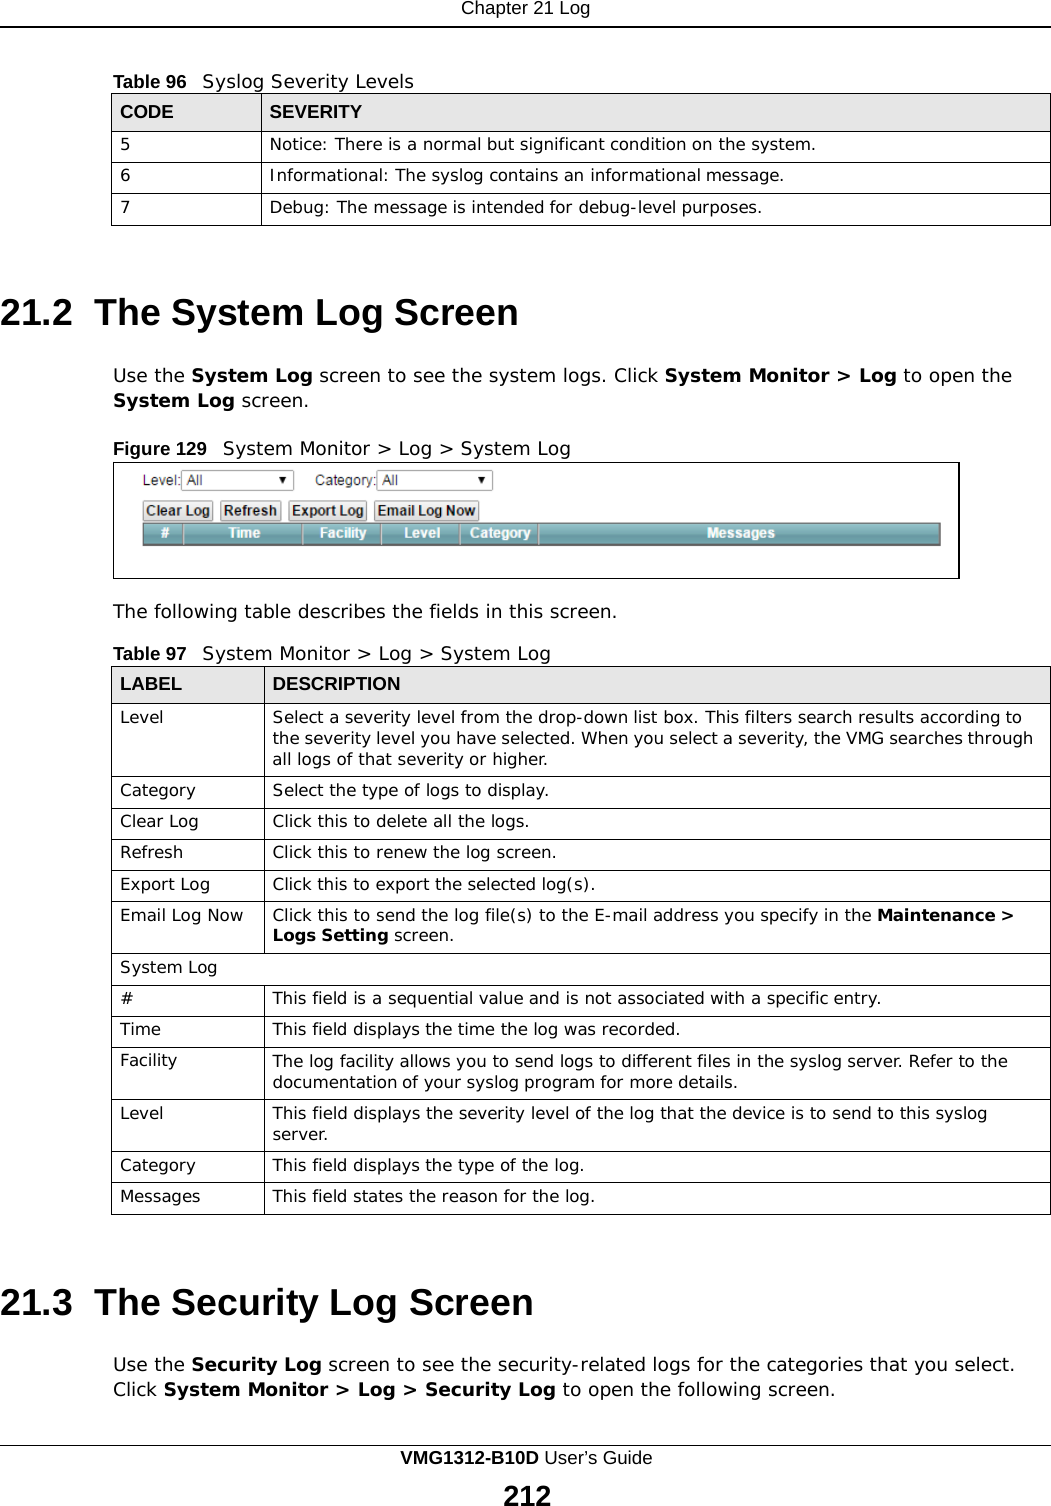 Chapter 21 Log      Table 96   Syslog Severity Levels  CODE SEVERITY 5 Notice: There is a normal but significant condition on the system. 6 Informational: The syslog contains an informational message. 7 Debug: The message is intended for debug-level purposes.    21.2  The System Log Screen  Use the System Log screen to see the system logs. Click System Monitor &gt; Log to open the System Log screen.  Figure 129   System Monitor &gt; Log &gt; System Log        The following table describes the fields in this screen.  Table 97   System Monitor &gt; Log &gt; System Log  LABEL DESCRIPTION Level Select a severity level from the drop-down list box. This filters search results according to the severity level you have selected. When you select a severity, the VMG searches through all logs of that severity or higher. Category Select the type of logs to display. Clear Log Click this to delete all the logs. Refresh Click this to renew the log screen. Export Log Click this to export the selected log(s). Email Log Now Click this to send the log file(s) to the E-mail address you specify in the Maintenance &gt; Logs Setting screen. System Log # This field is a sequential value and is not associated with a specific entry. Time This field displays the time the log was recorded. Facility The log facility allows you to send logs to different files in the syslog server. Refer to the documentation of your syslog program for more details. Level This field displays the severity level of the log that the device is to send to this syslog server. Category This field displays the type of the log. Messages This field states the reason for the log.    21.3  The Security Log Screen  Use the Security Log screen to see the security-related logs for the categories that you select. Click System Monitor &gt; Log &gt; Security Log to open the following screen. VMG1312-B10D User’s Guide 212  